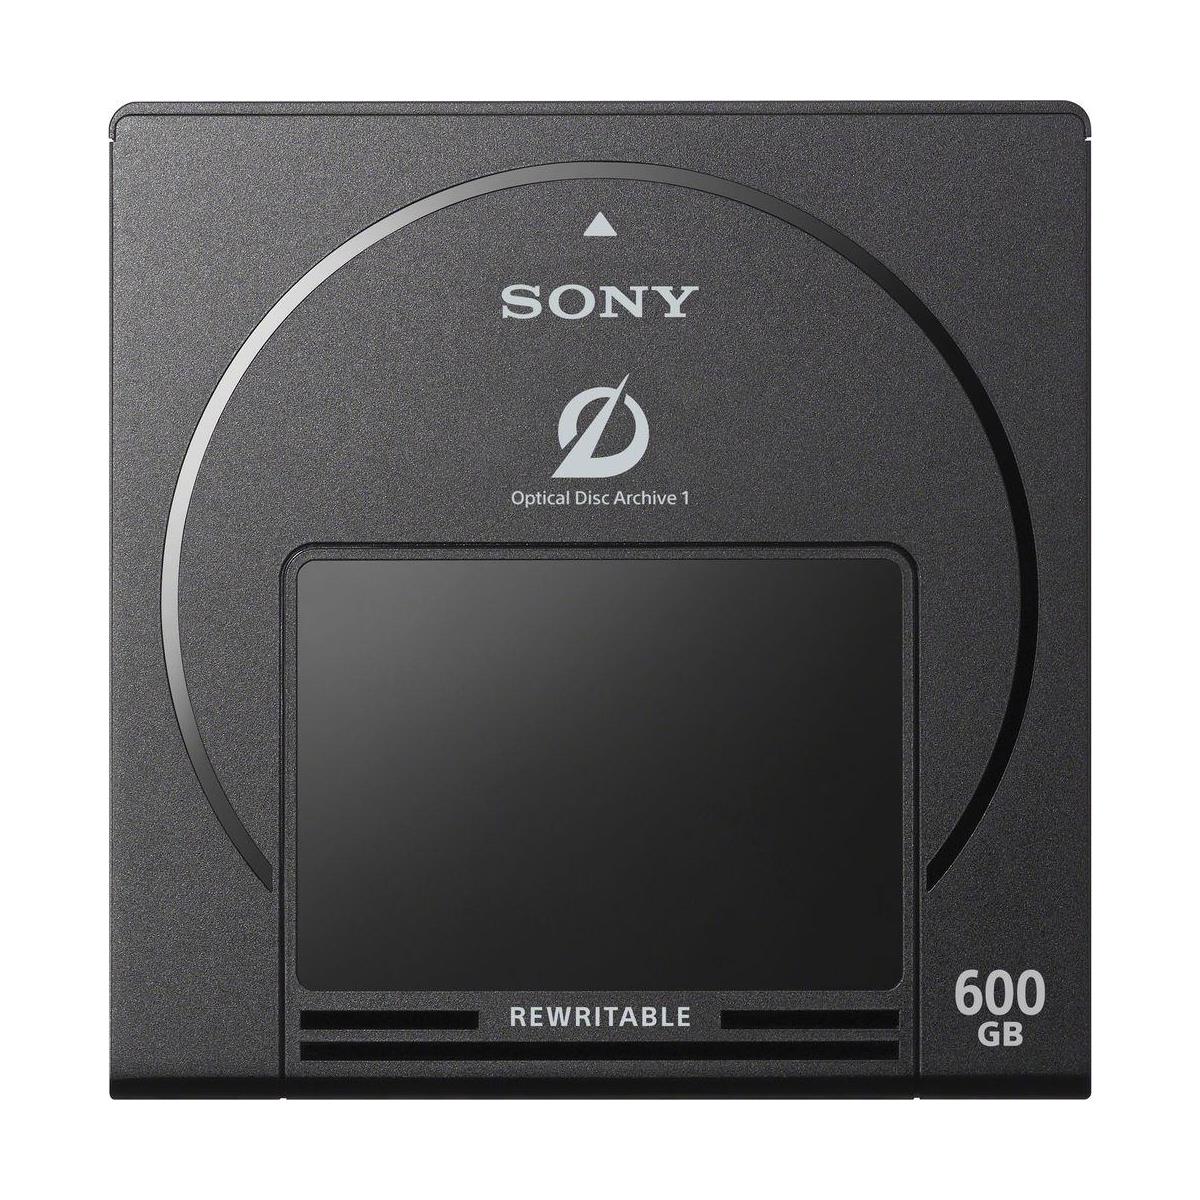 Image of Sony 600GB Rewritable Cartridge for ODS-D55U and ODS-D77U Optical Disc